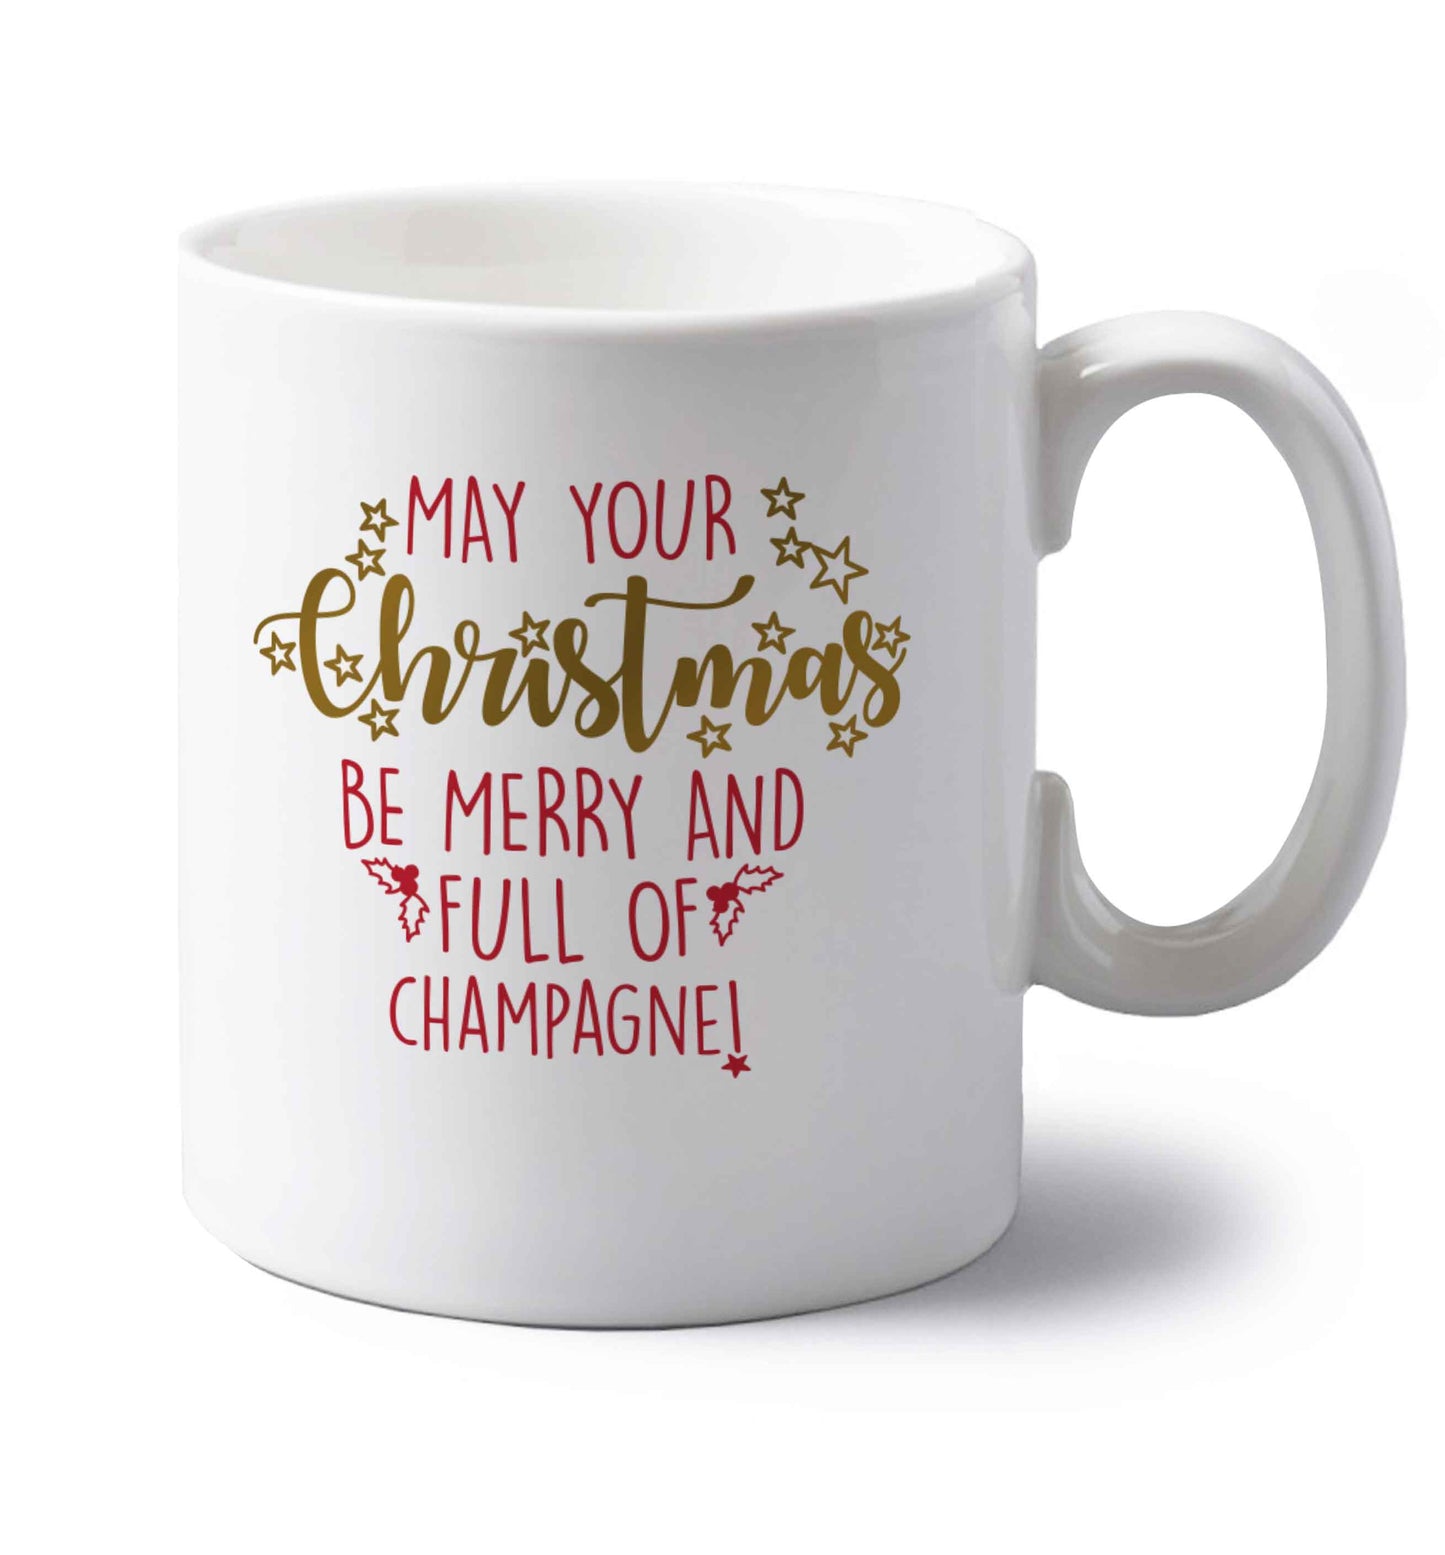 May your Christmas be merry and full of champagne left handed white ceramic mug 